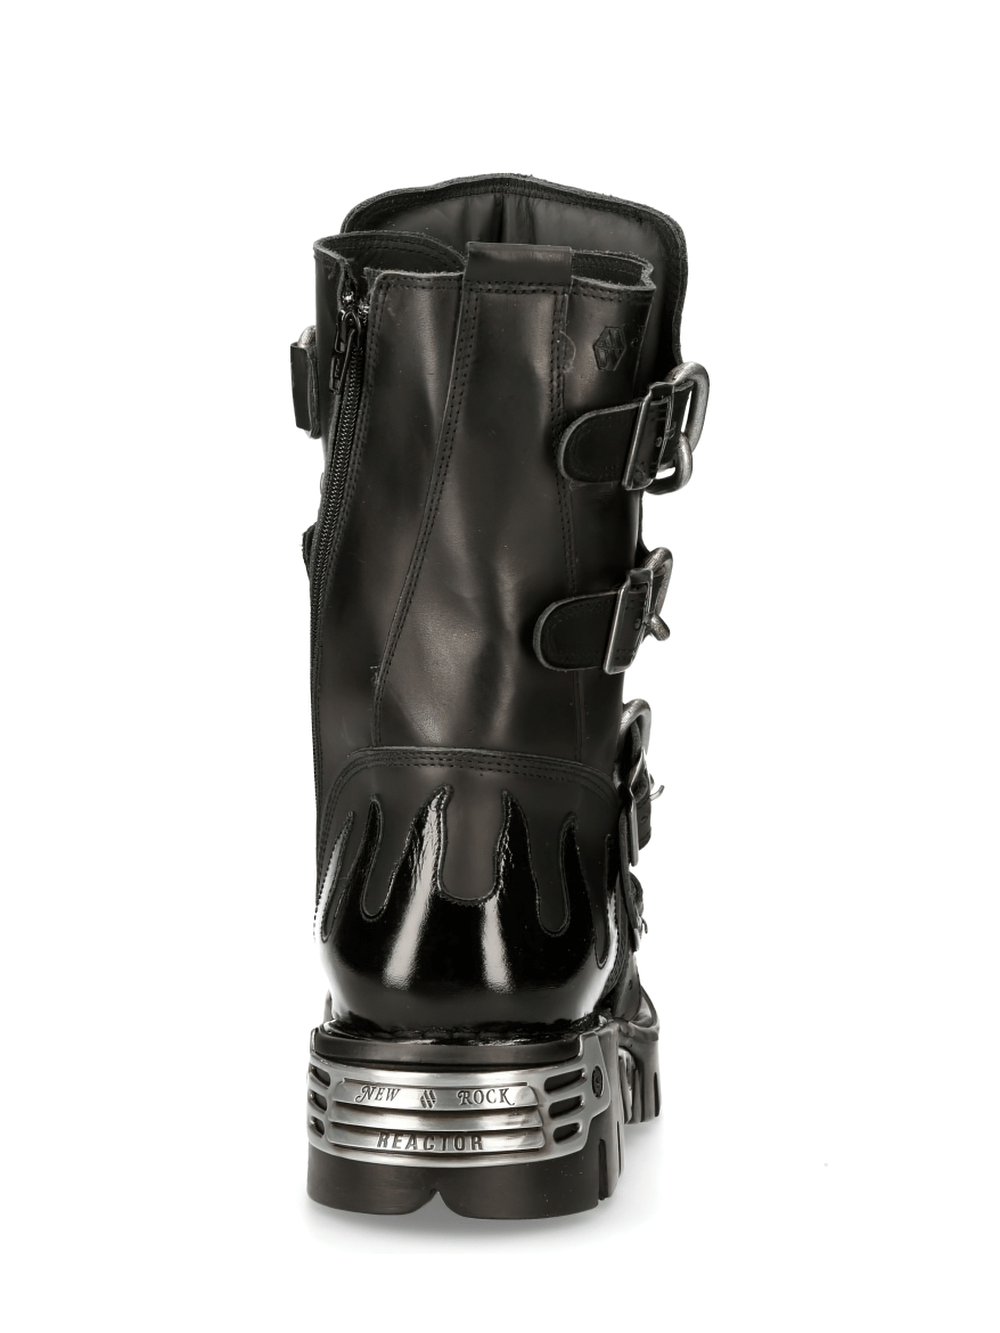 NEW ROCK Chained Gothic Boots with Metal Accents